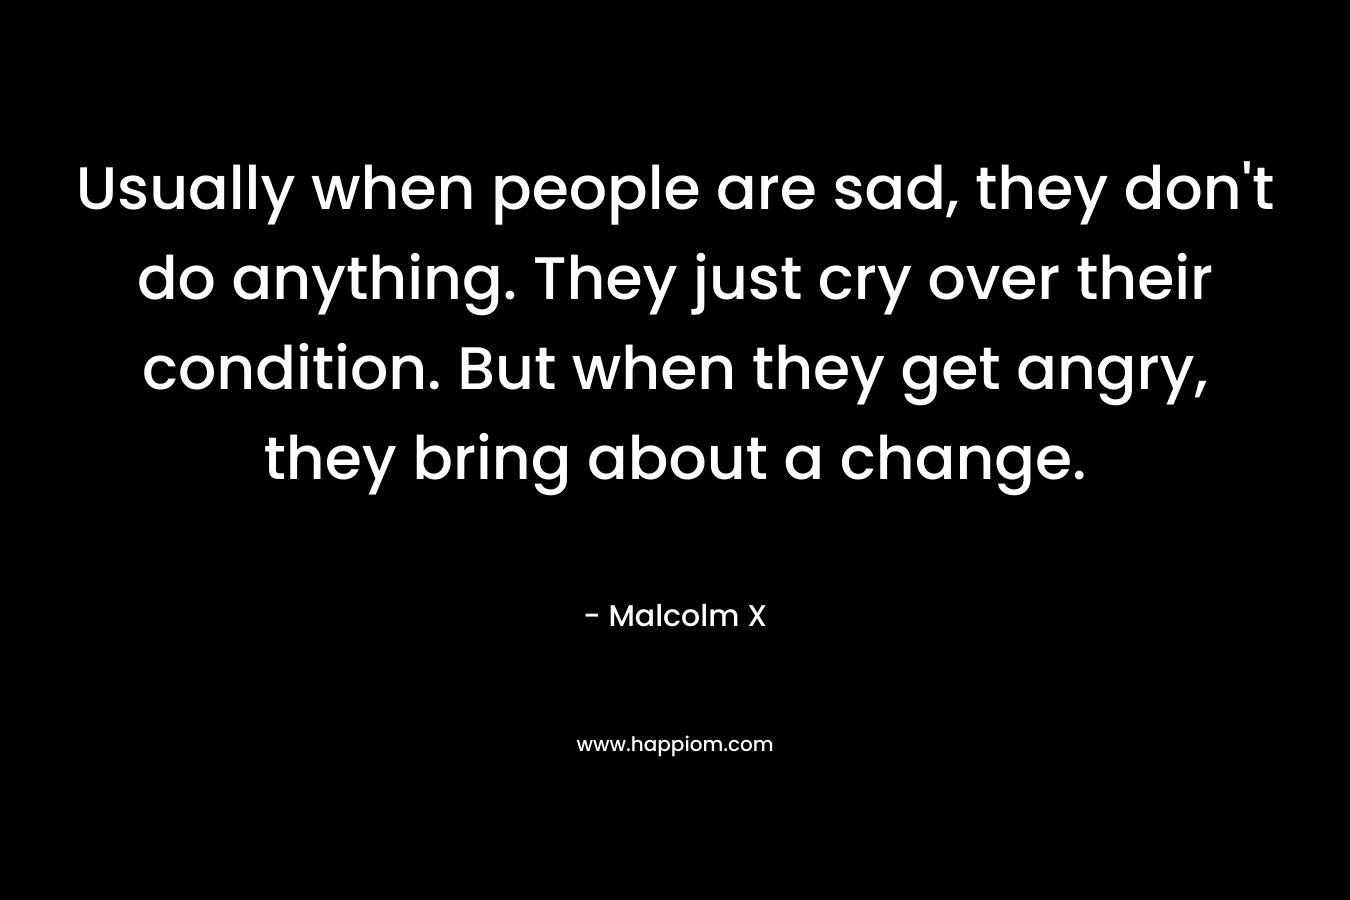 Usually when people are sad, they don’t do anything. They just cry over their condition. But when they get angry, they bring about a change. – Malcolm X